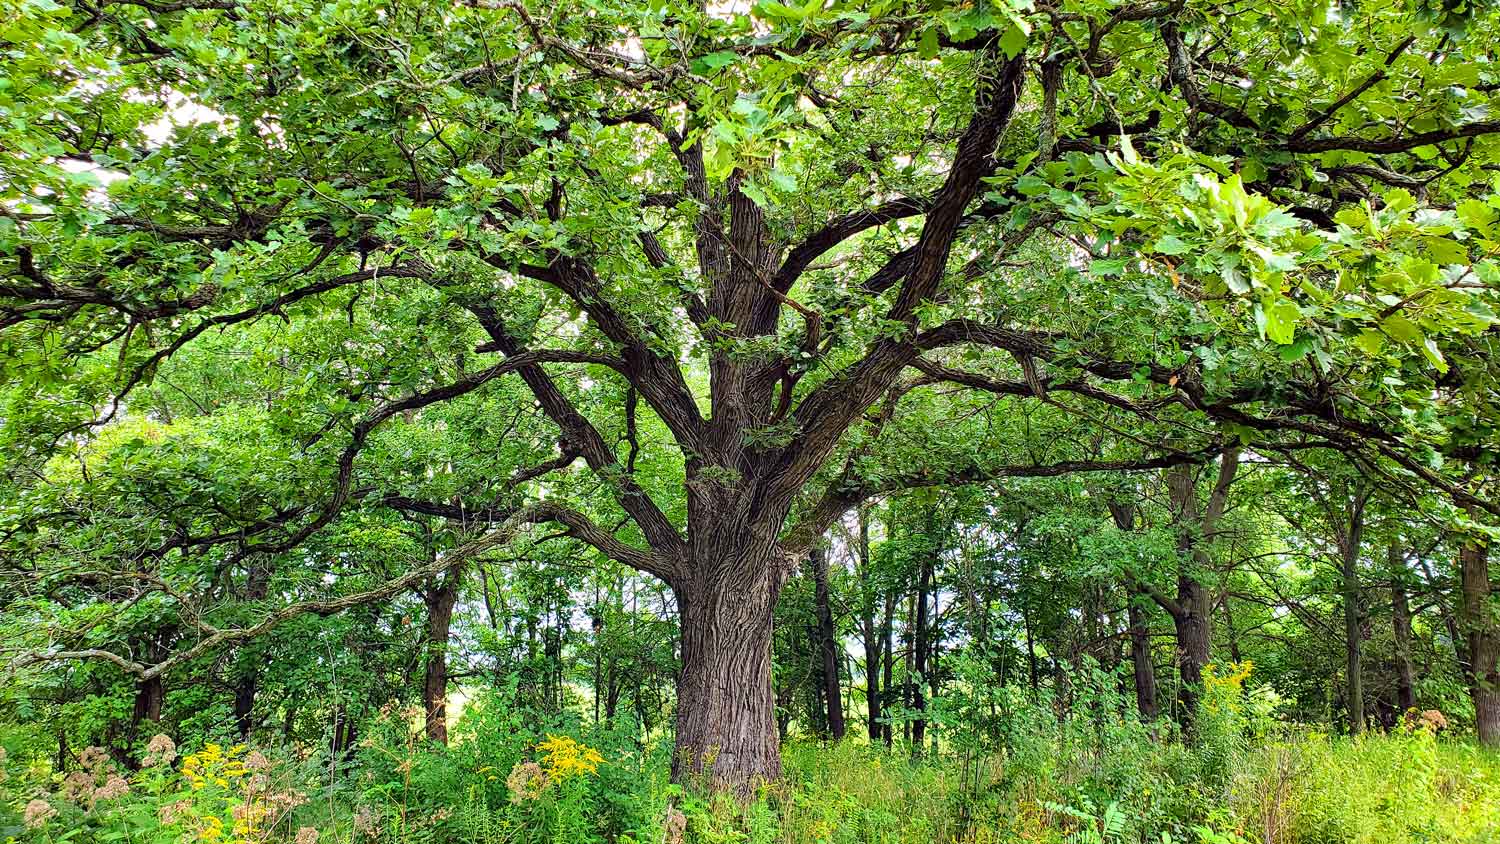 Amazing grand tree near the picnic shelter by the pond at the Pleasant Valley Conservation Area.